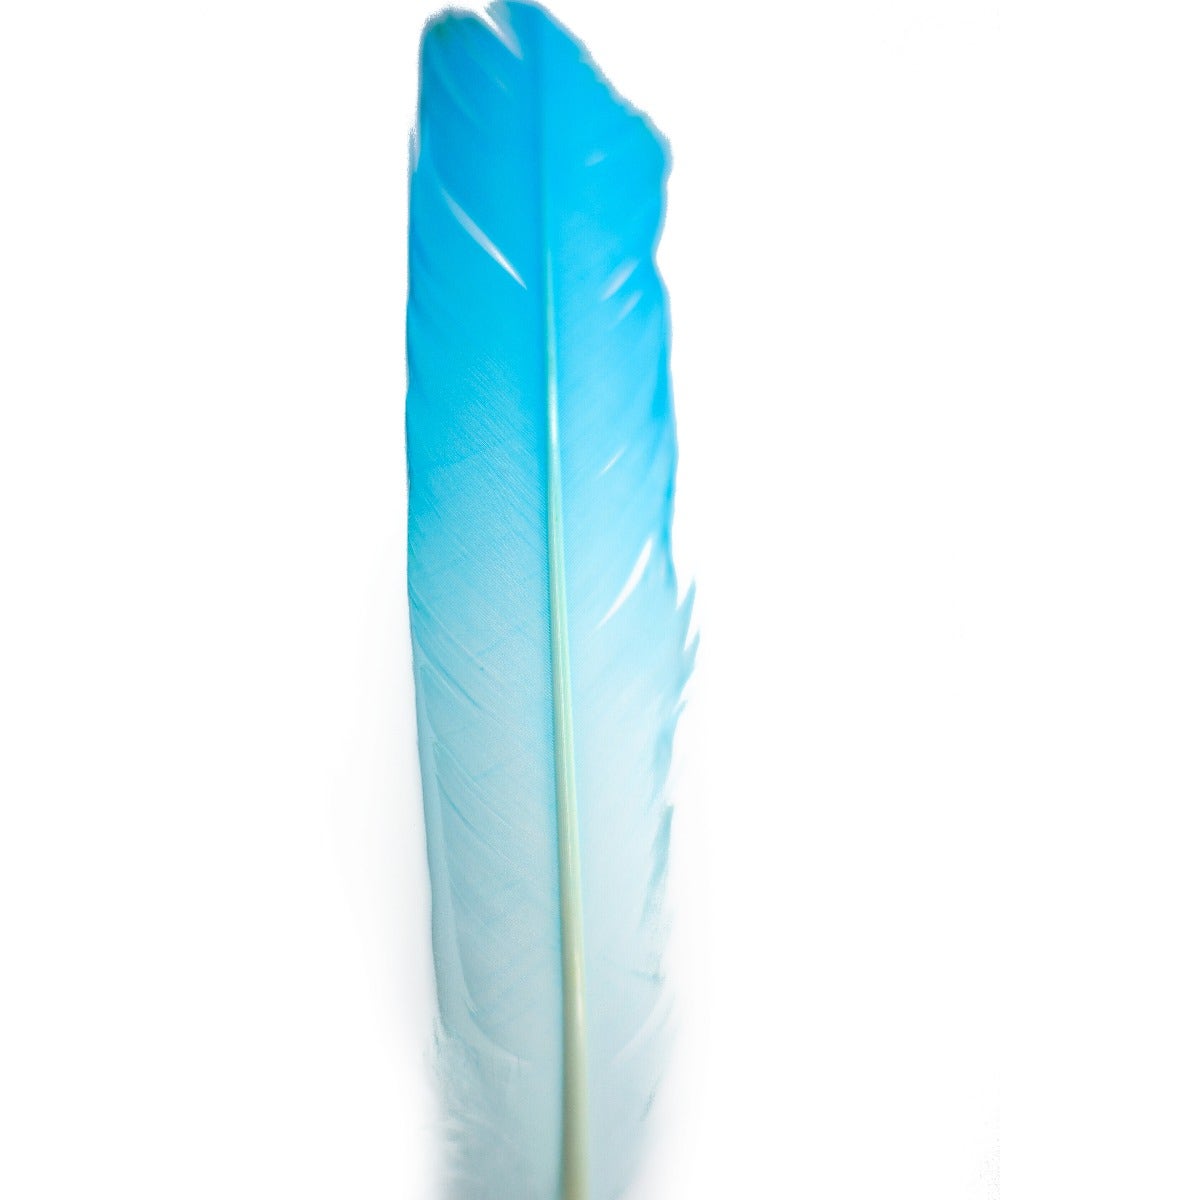 Ombré Turkey Quill Feathers 10-12” 2 pc- Light Turquoise - White